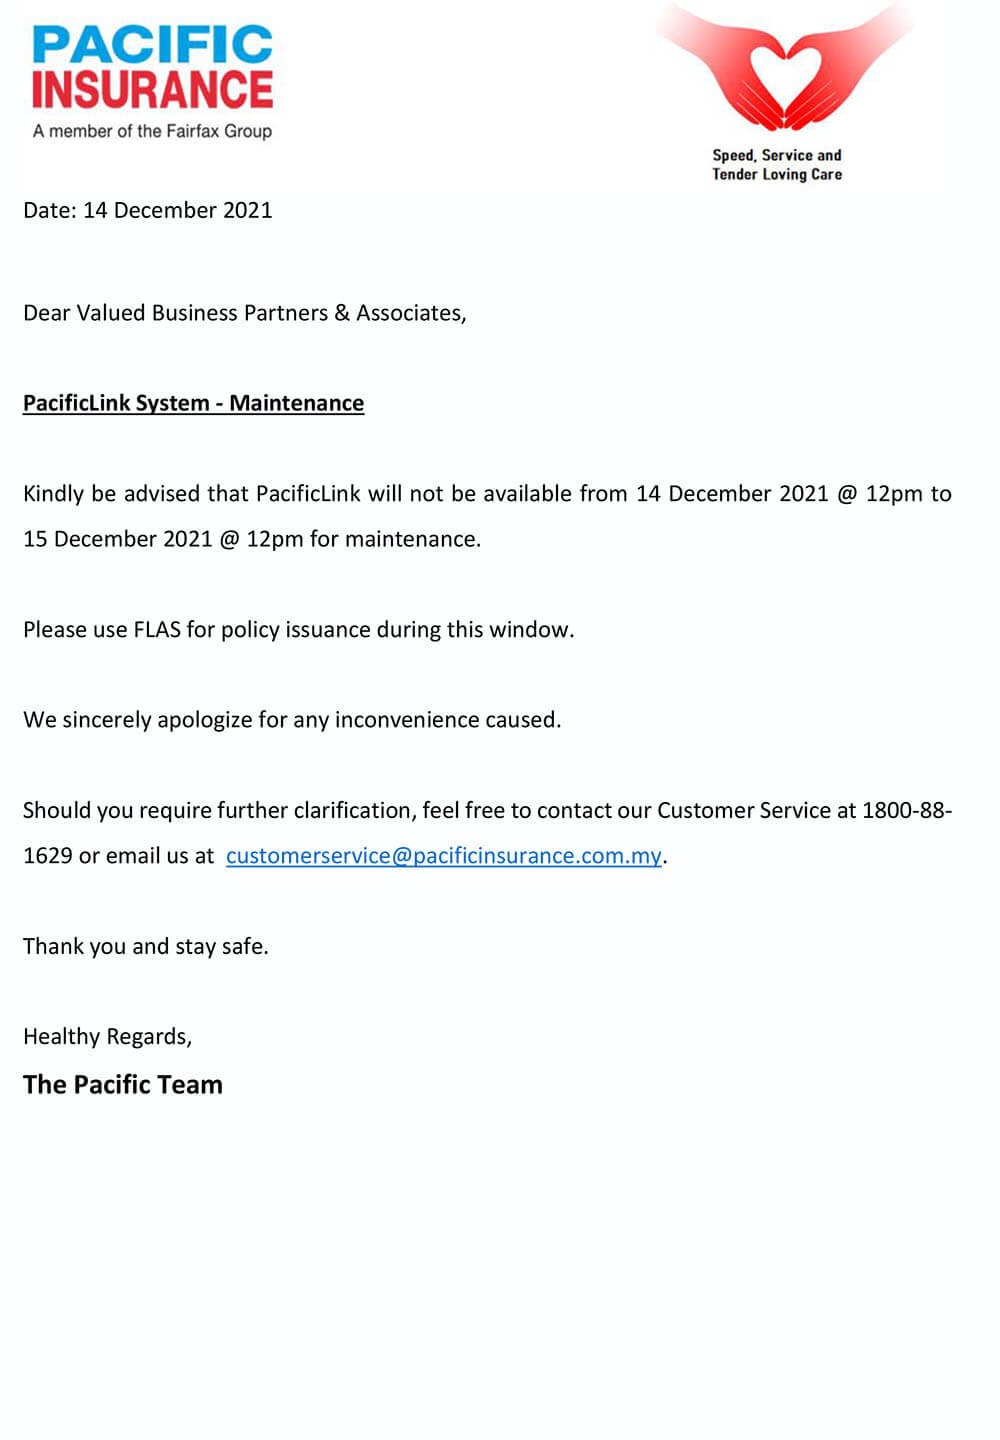 PacificLink System Down For Maintenance 14 December 2021